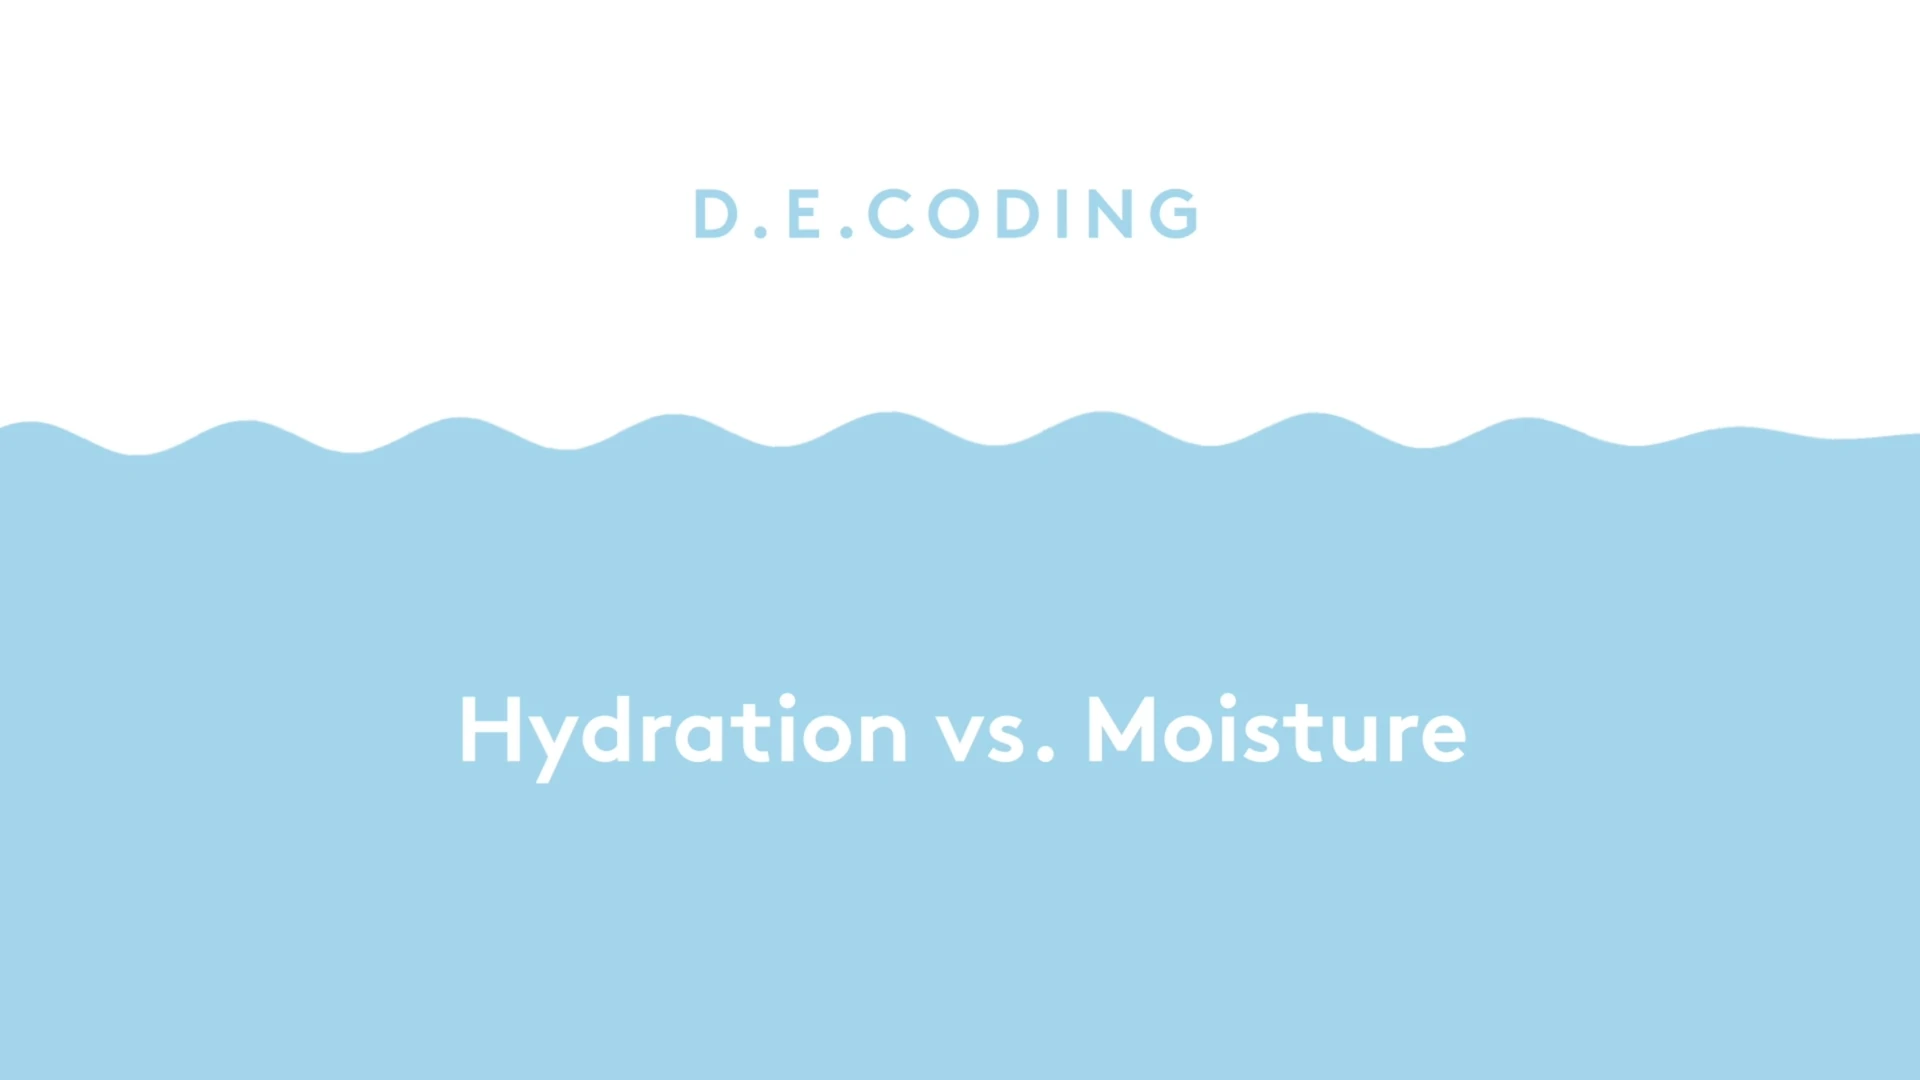 D.E. Coding Hydration v. Moisture, Light blue waves with white text